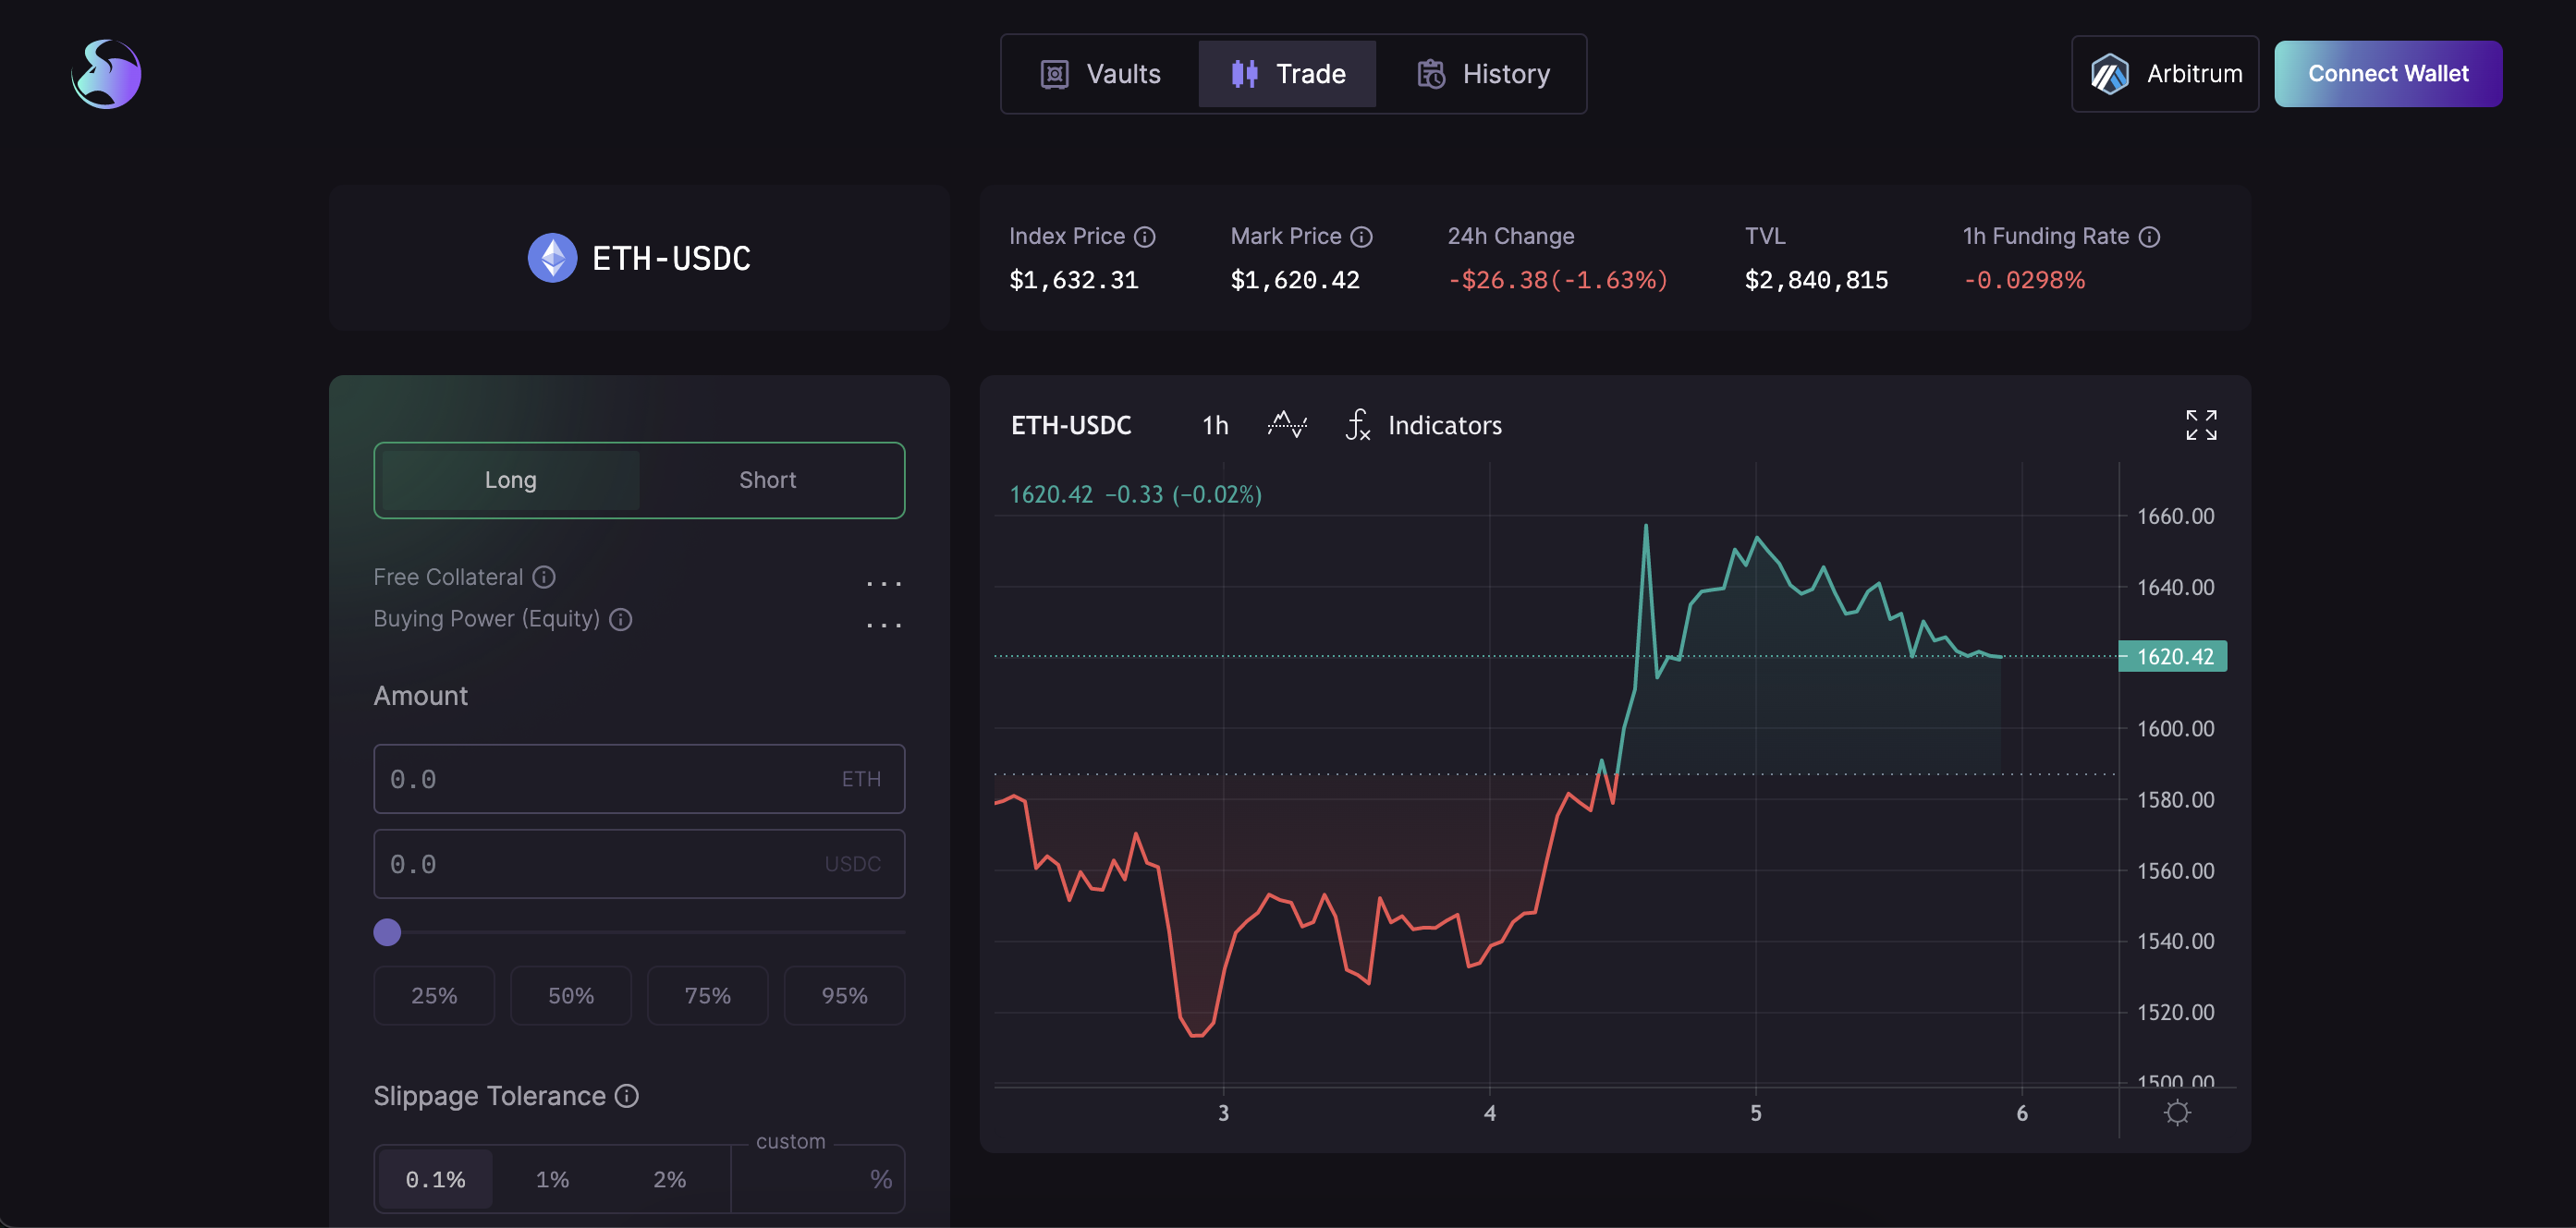 Rage Trade's trading interface for longing or shorting $ETH with up to 10x leverage